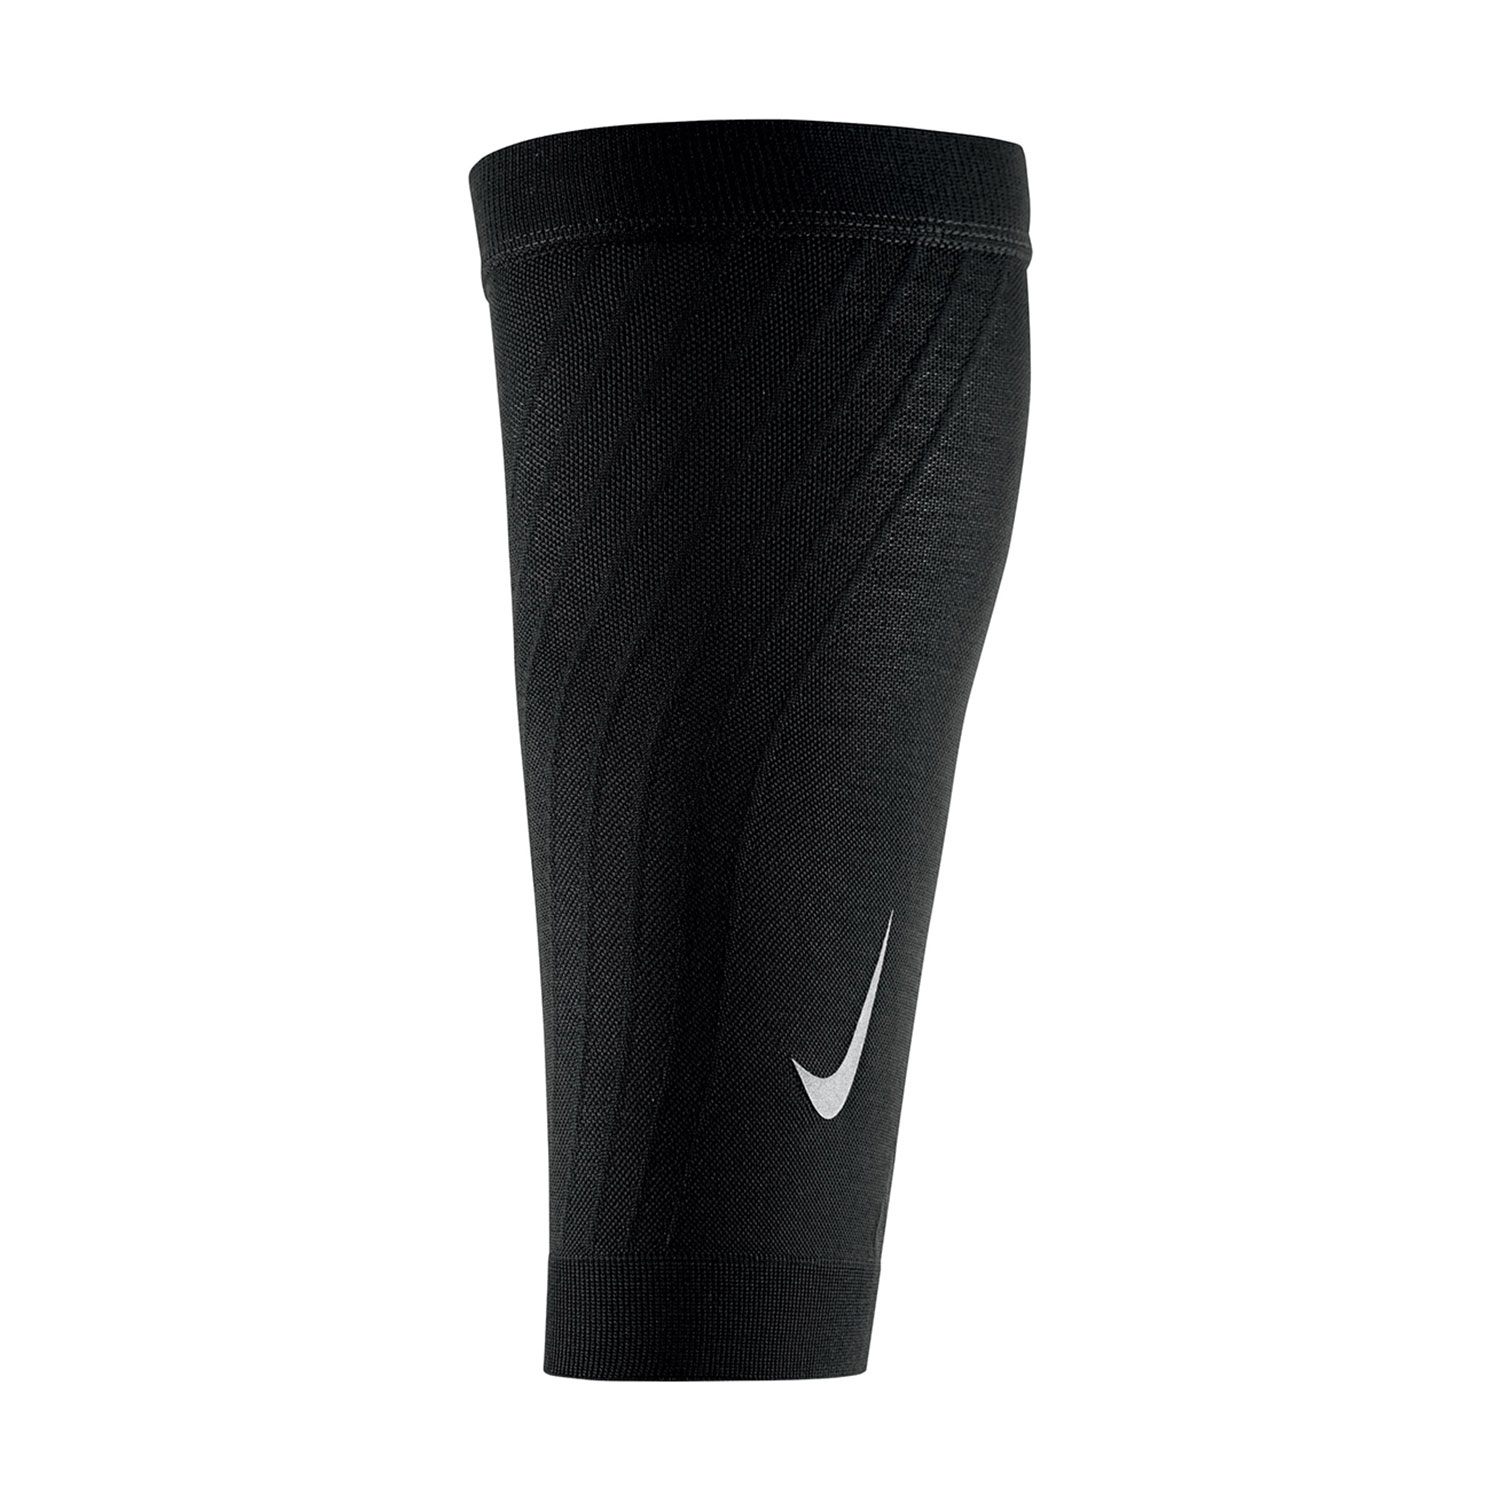 Nike Zoned Support Compression Calf Sleeves - Black/Silver